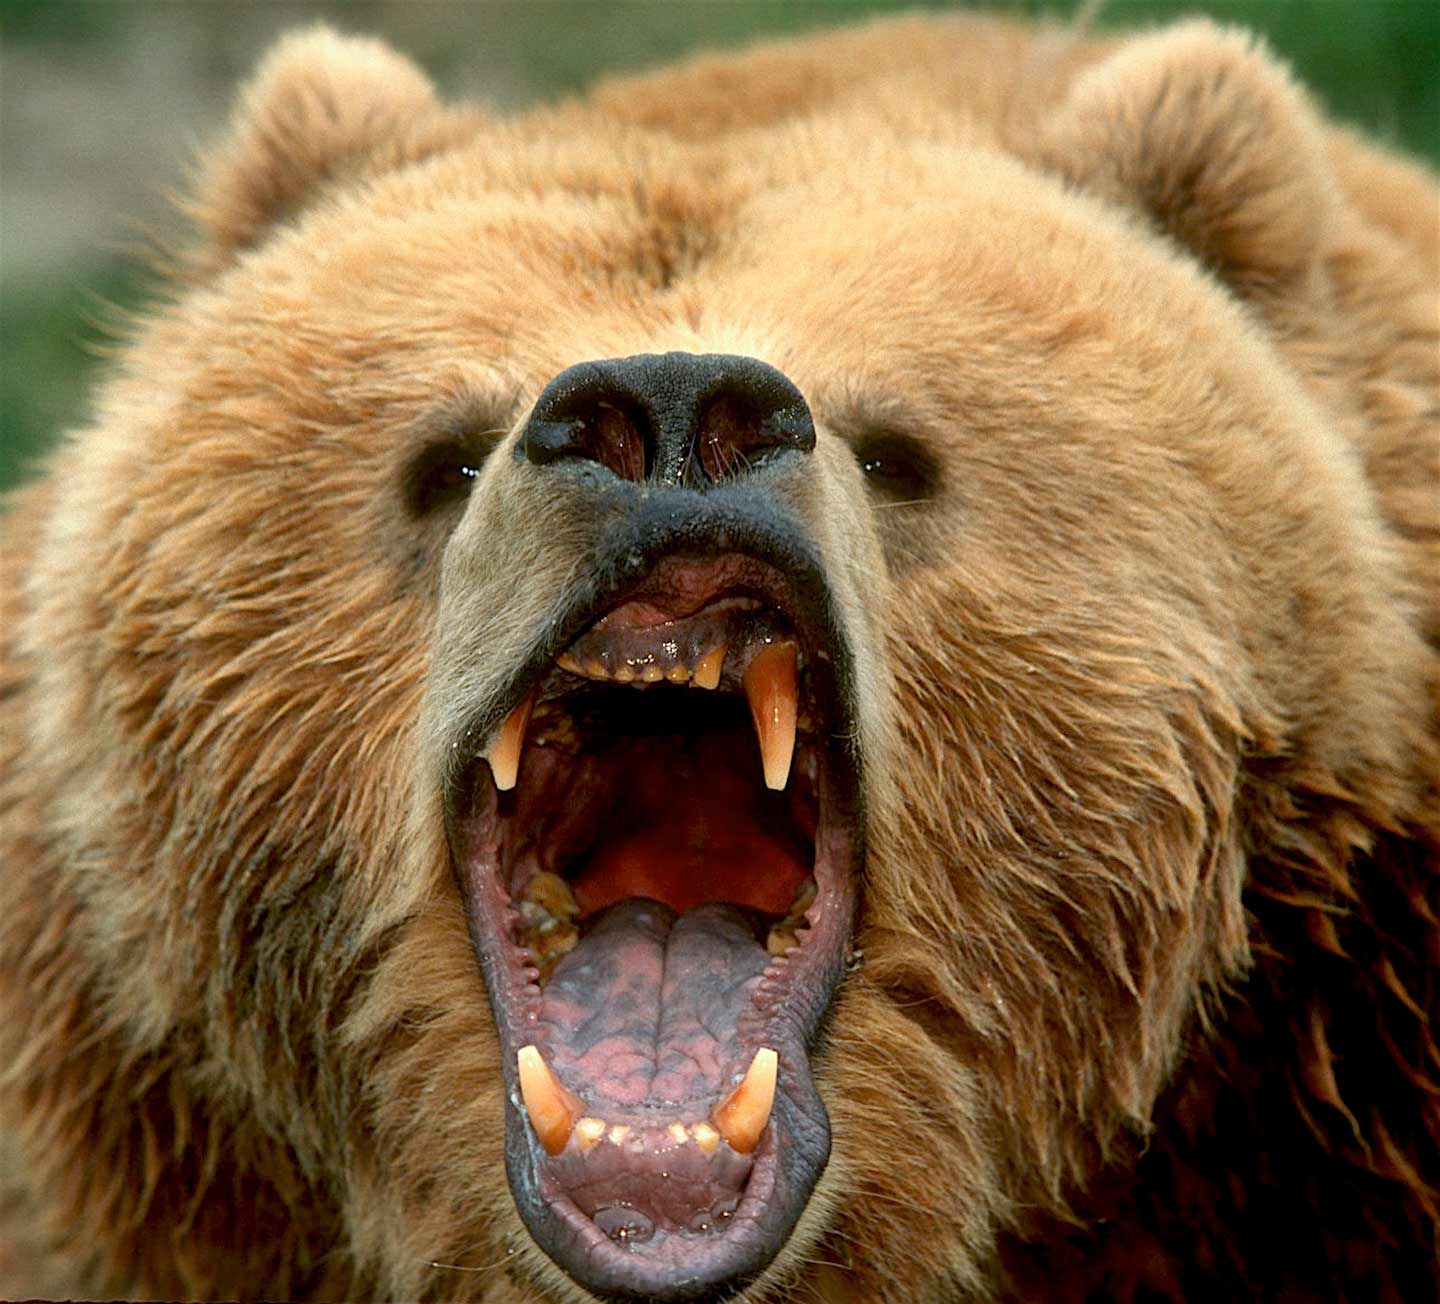 a roaring grizzly bear